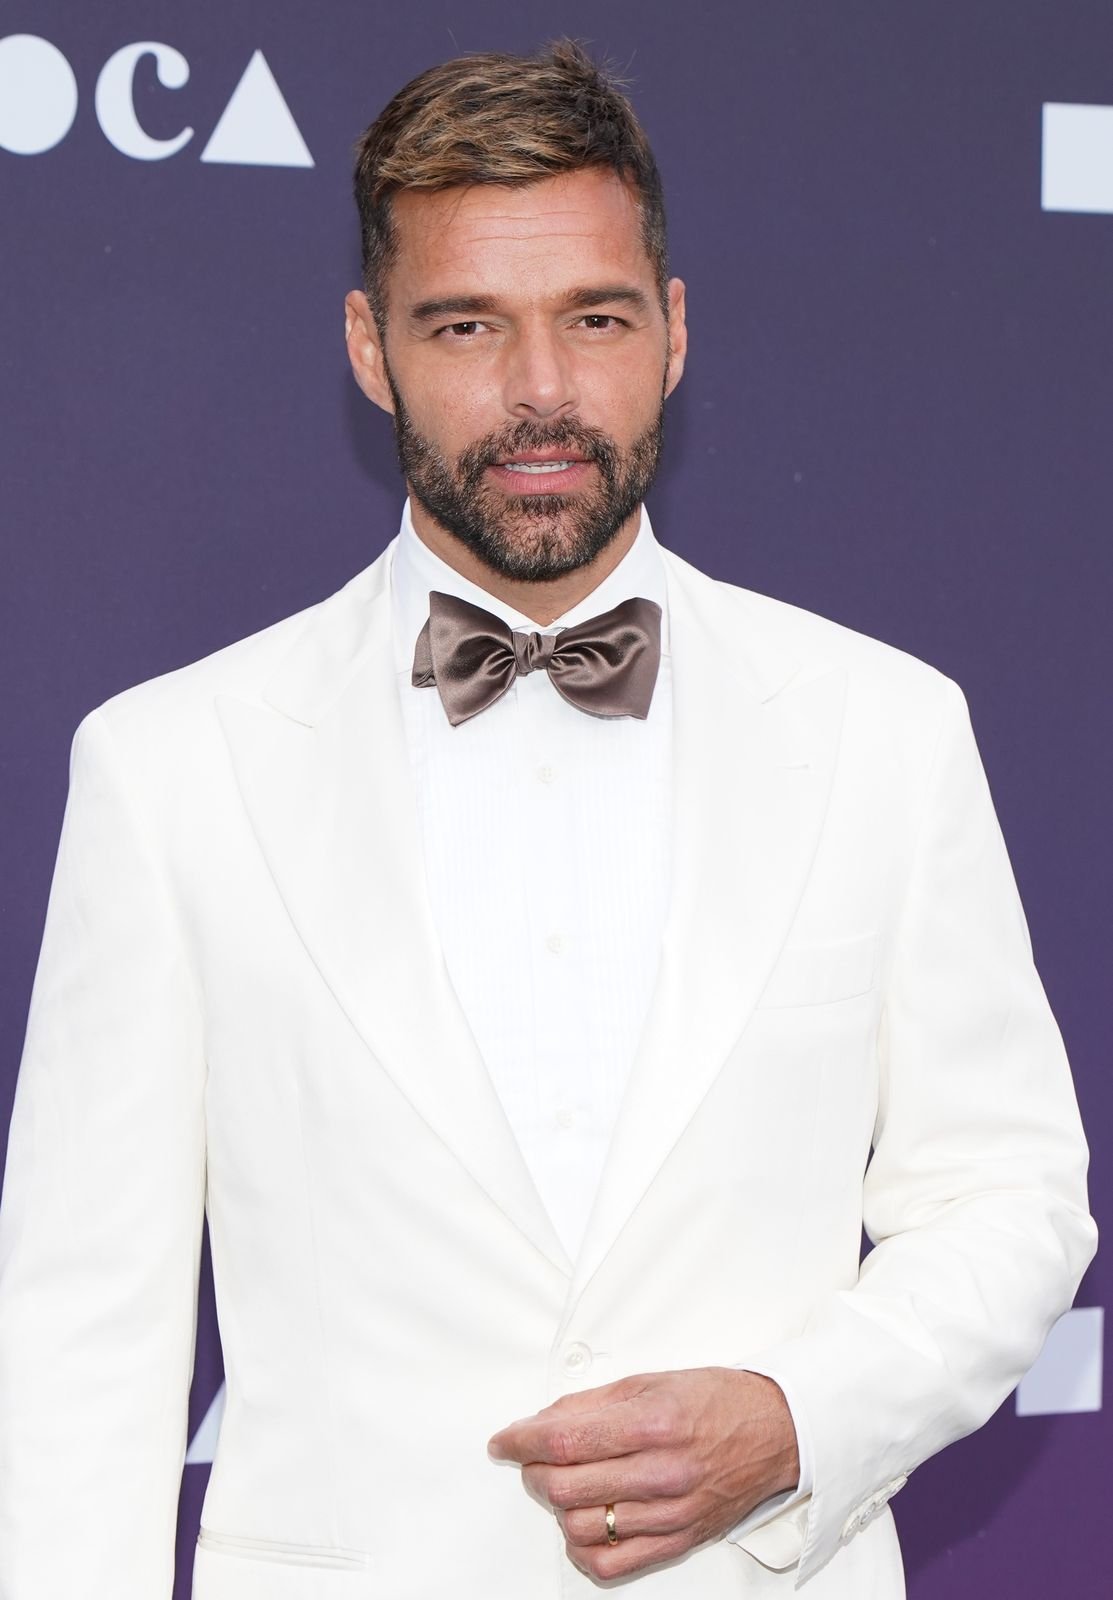 Ricky Martin at the MOCA Benefit at The Geffen Contemporary at MOCA on May 18, 2019, in Los Angeles, California | Photo: Rachel Luna/WireImage/Getty Images